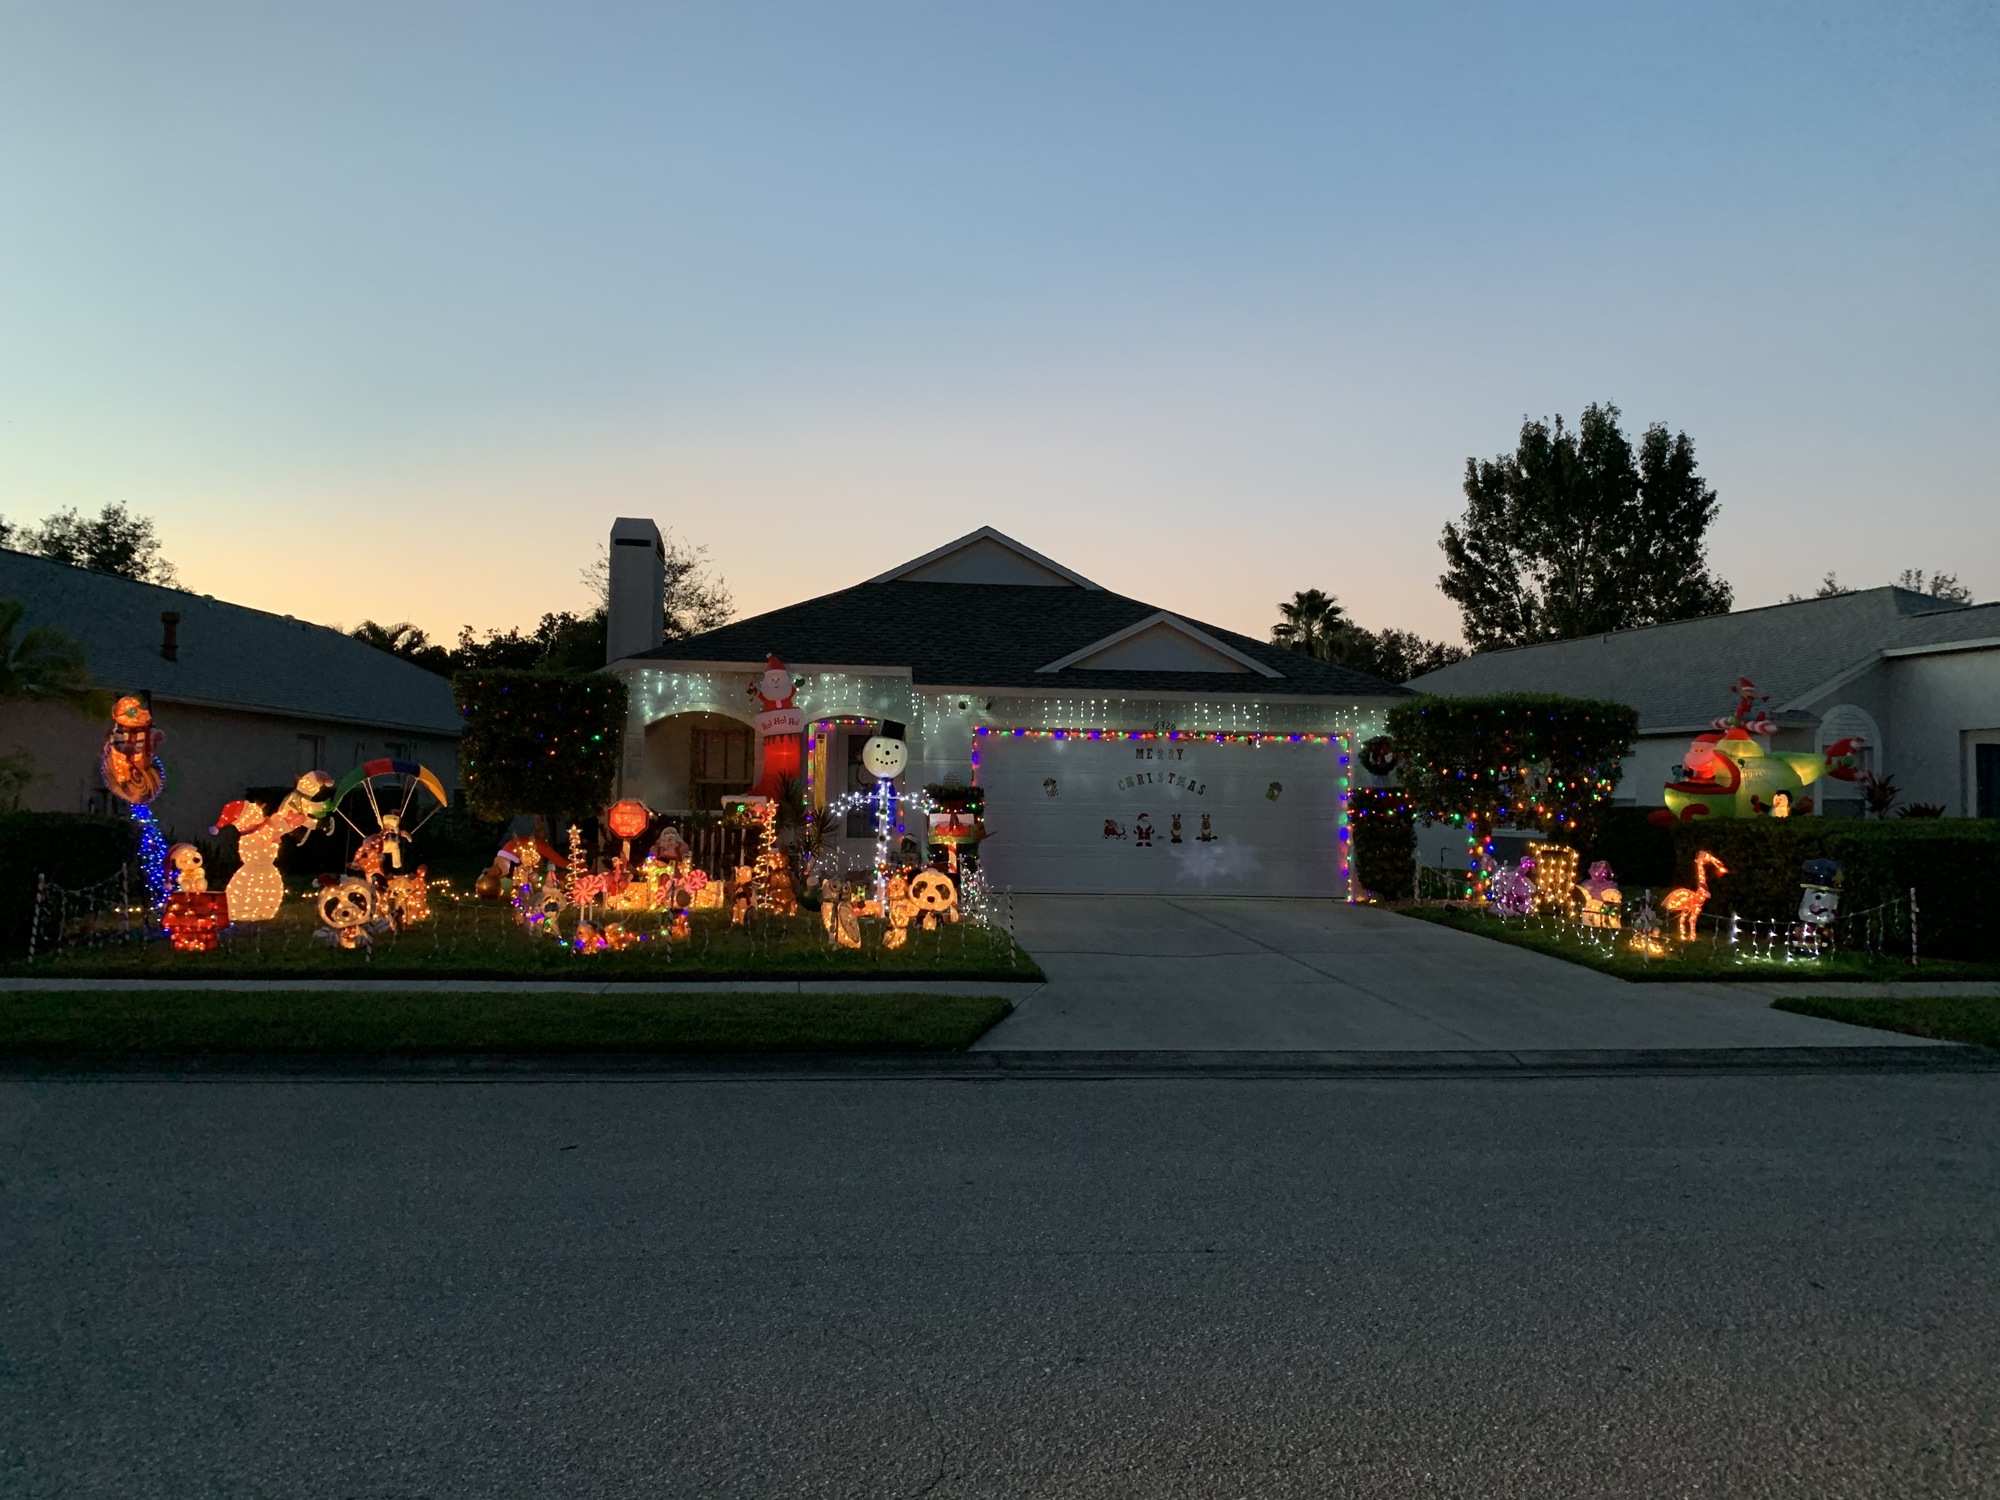 Families come from all around Lakewood Ranch to visit Ray and Patti Papiano's Summerfield home to see the light display. Photo by Liz Ramos.